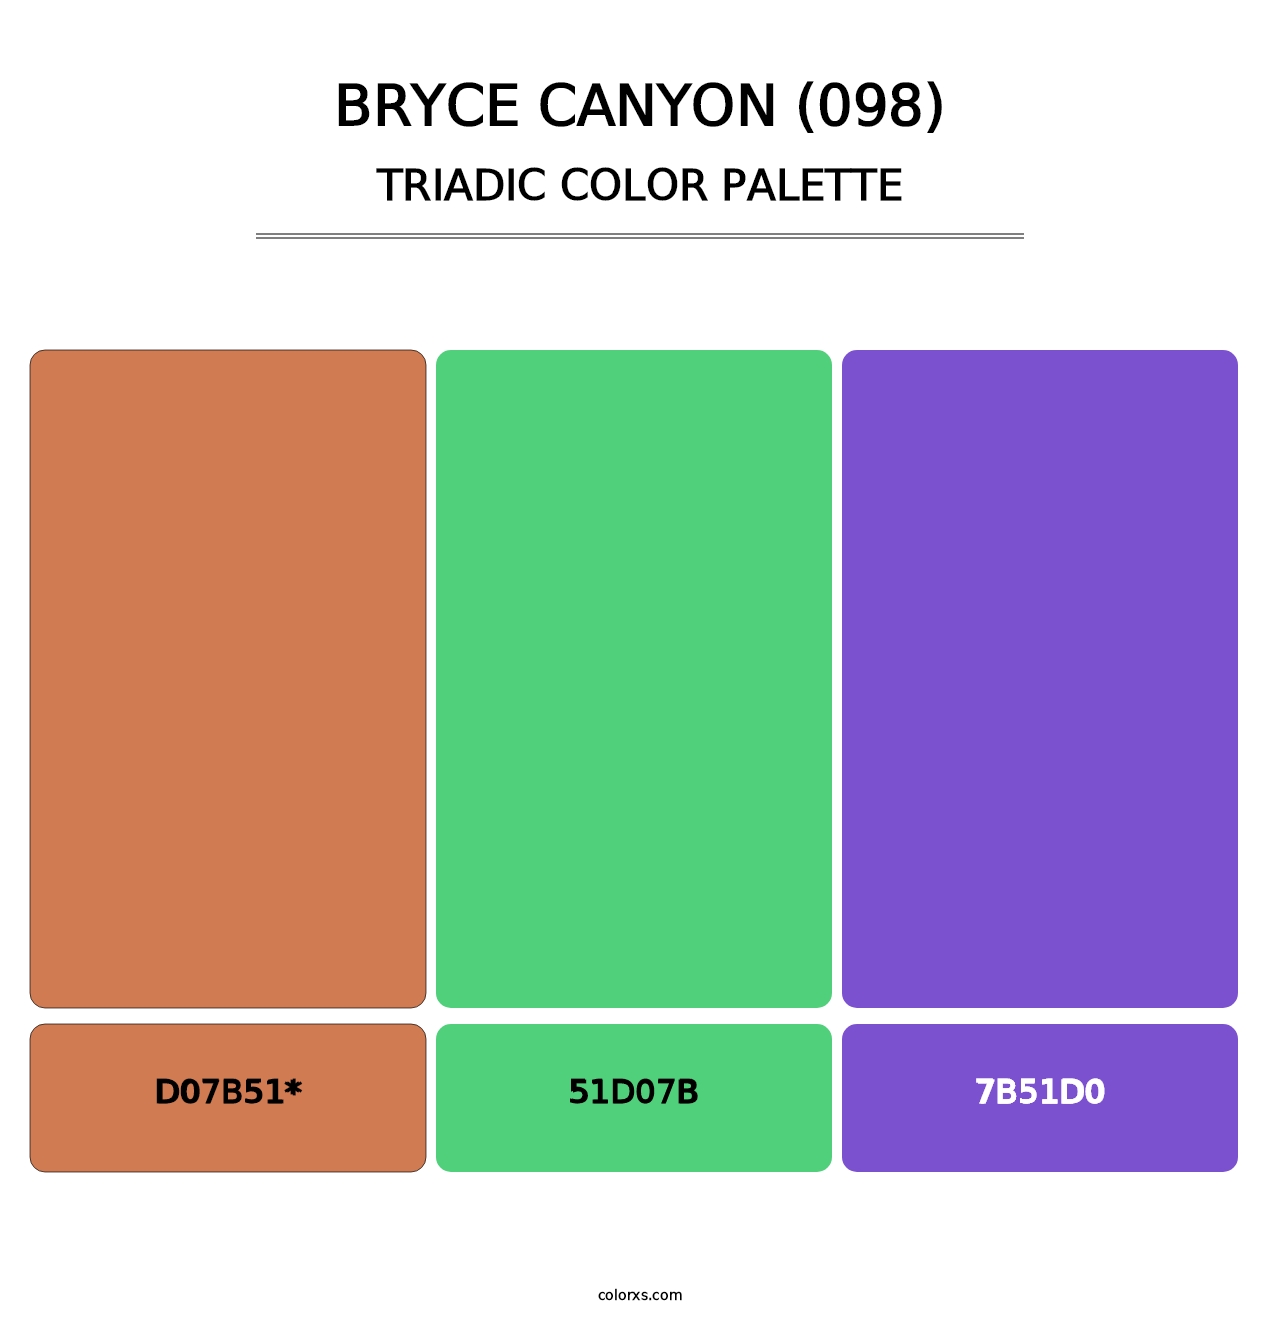 Bryce Canyon (098) - Triadic Color Palette